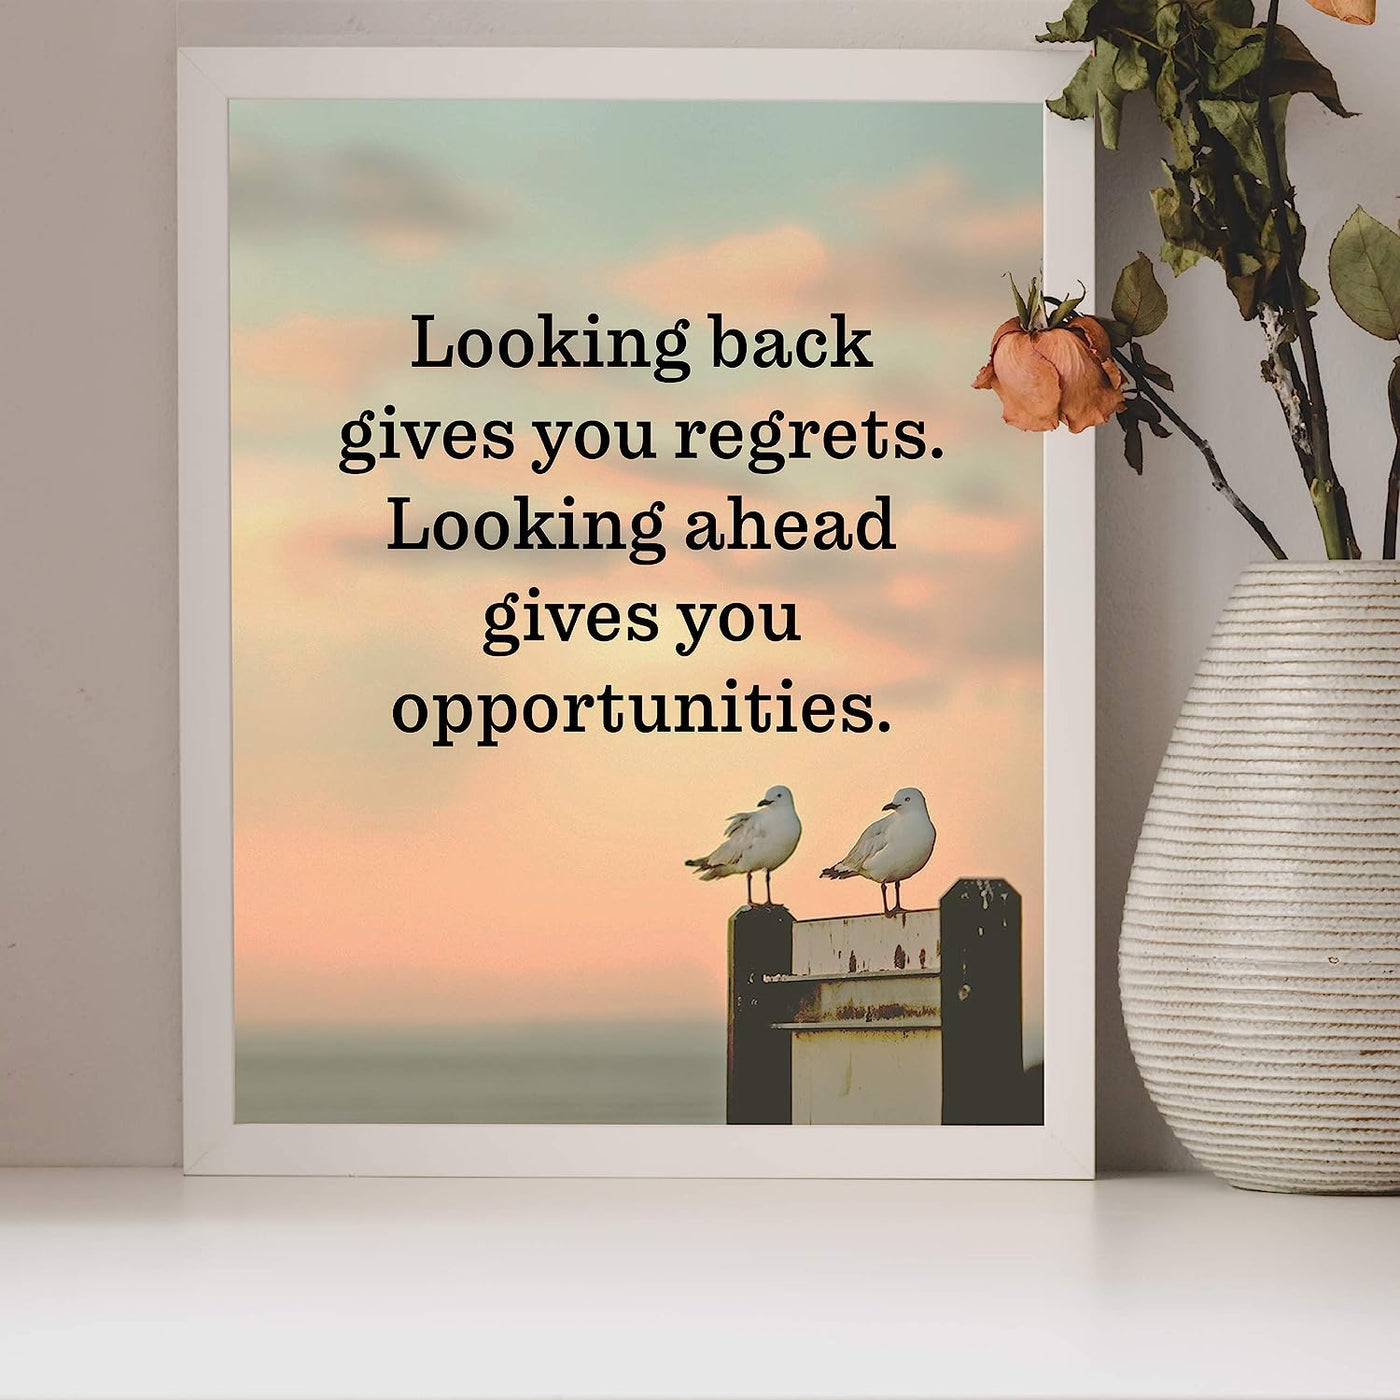 Looking Ahead Gives You Opportunities Beach Poster Print-8x10" Inspirational Quotes Wall Art-Ready to Frame. Home-Office-Ocean Theme Decor. Perfect Guest-Beach House Sign! Great Life Lesson!